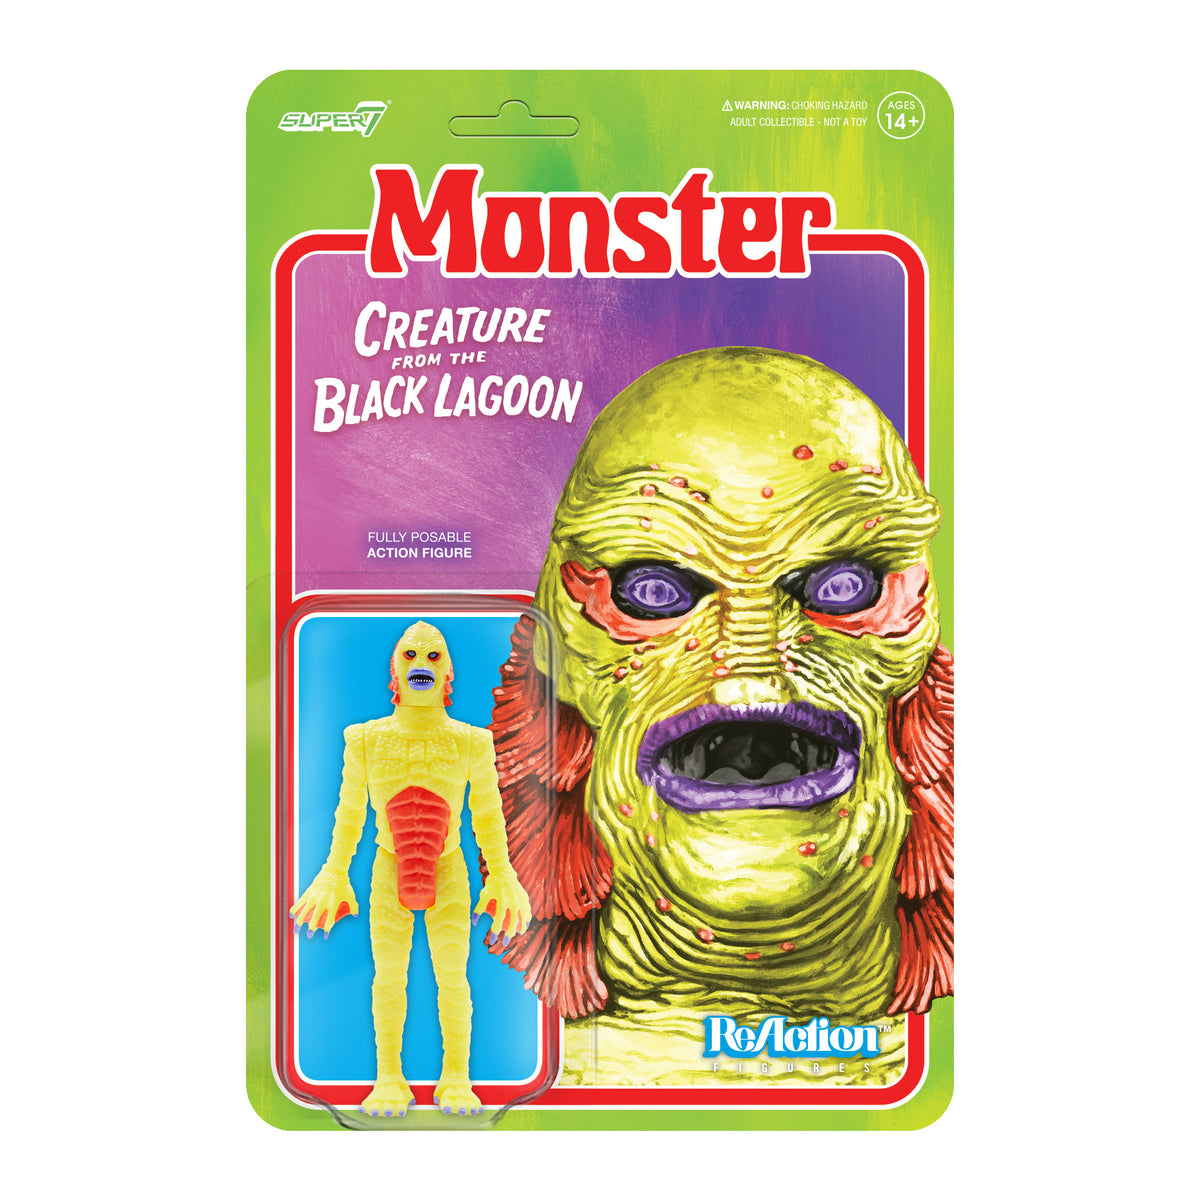 WEREWOLF BY NIGHT + CREATURE FROM THE BLACK LAGOON (On-Sale Info